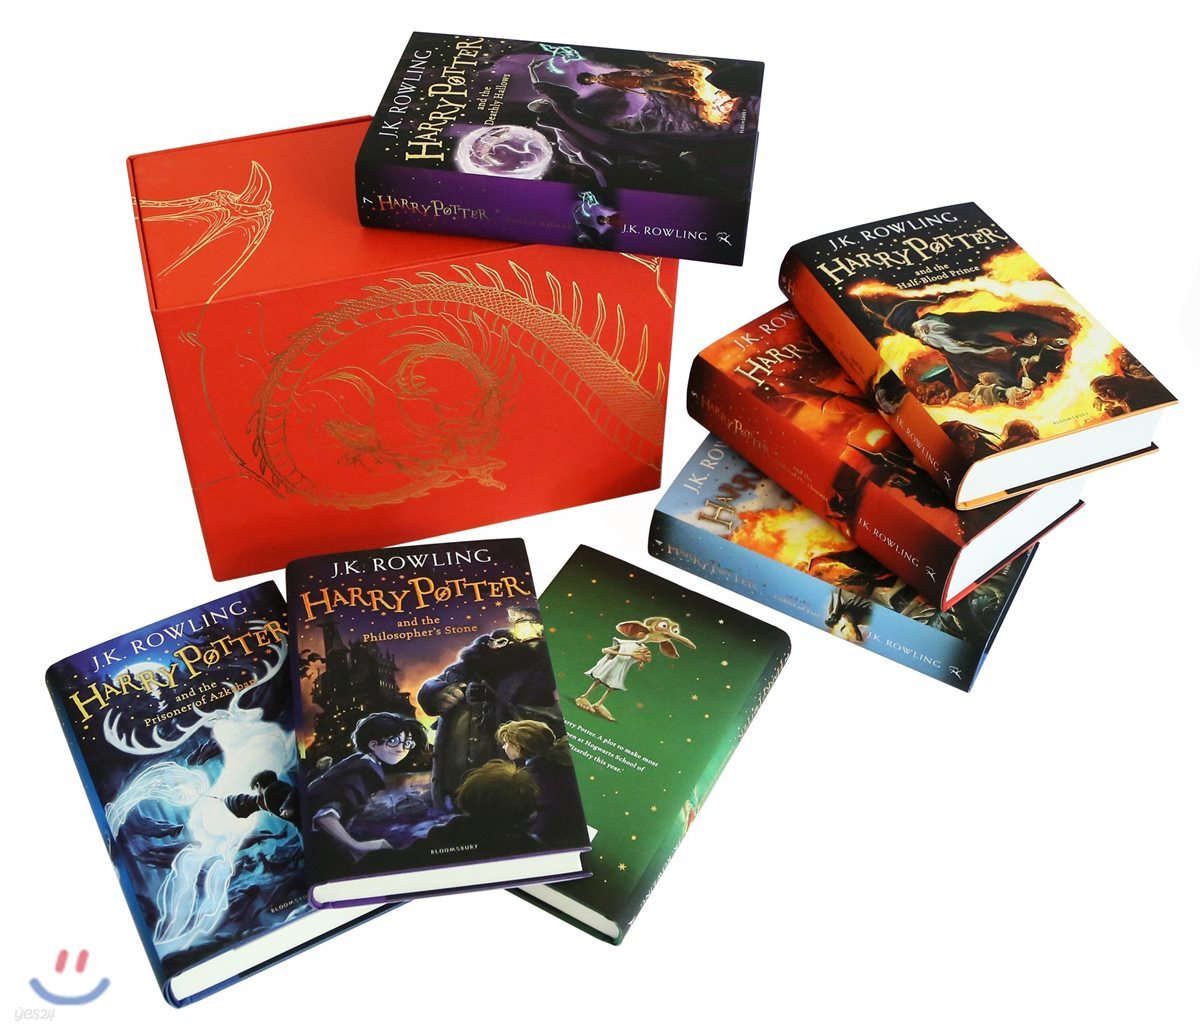 Harry Potter Boxed Set: The Complete Collection 해리포터 원서 하드커버 7권 박스 세트 (영국판)